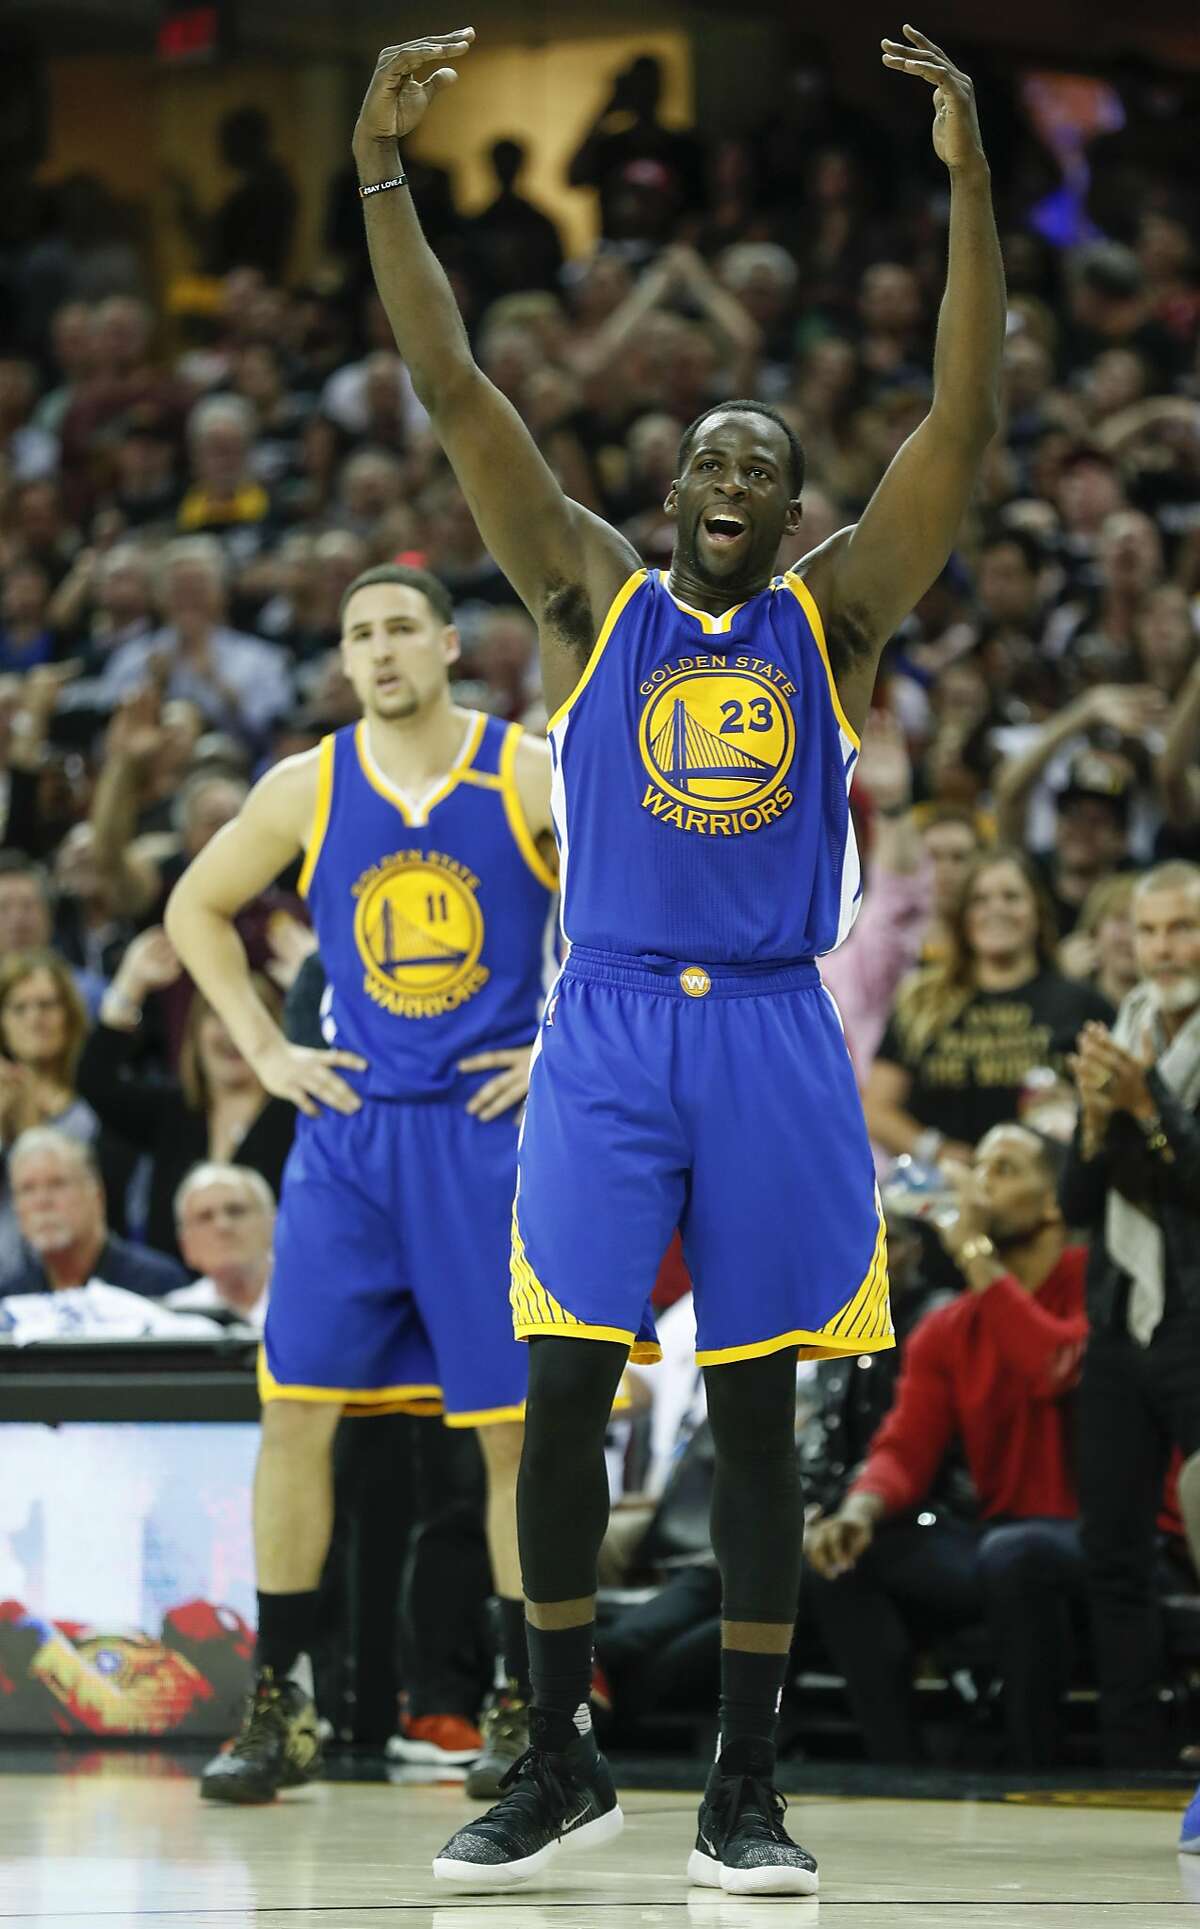 Golden State Warriors' Draymond Green reacts in the third quarter during Game 4 of the 2017 NBA Finals at Quicken Loans Arena on Friday, June 9, 2017 in Cleveland, Ohio